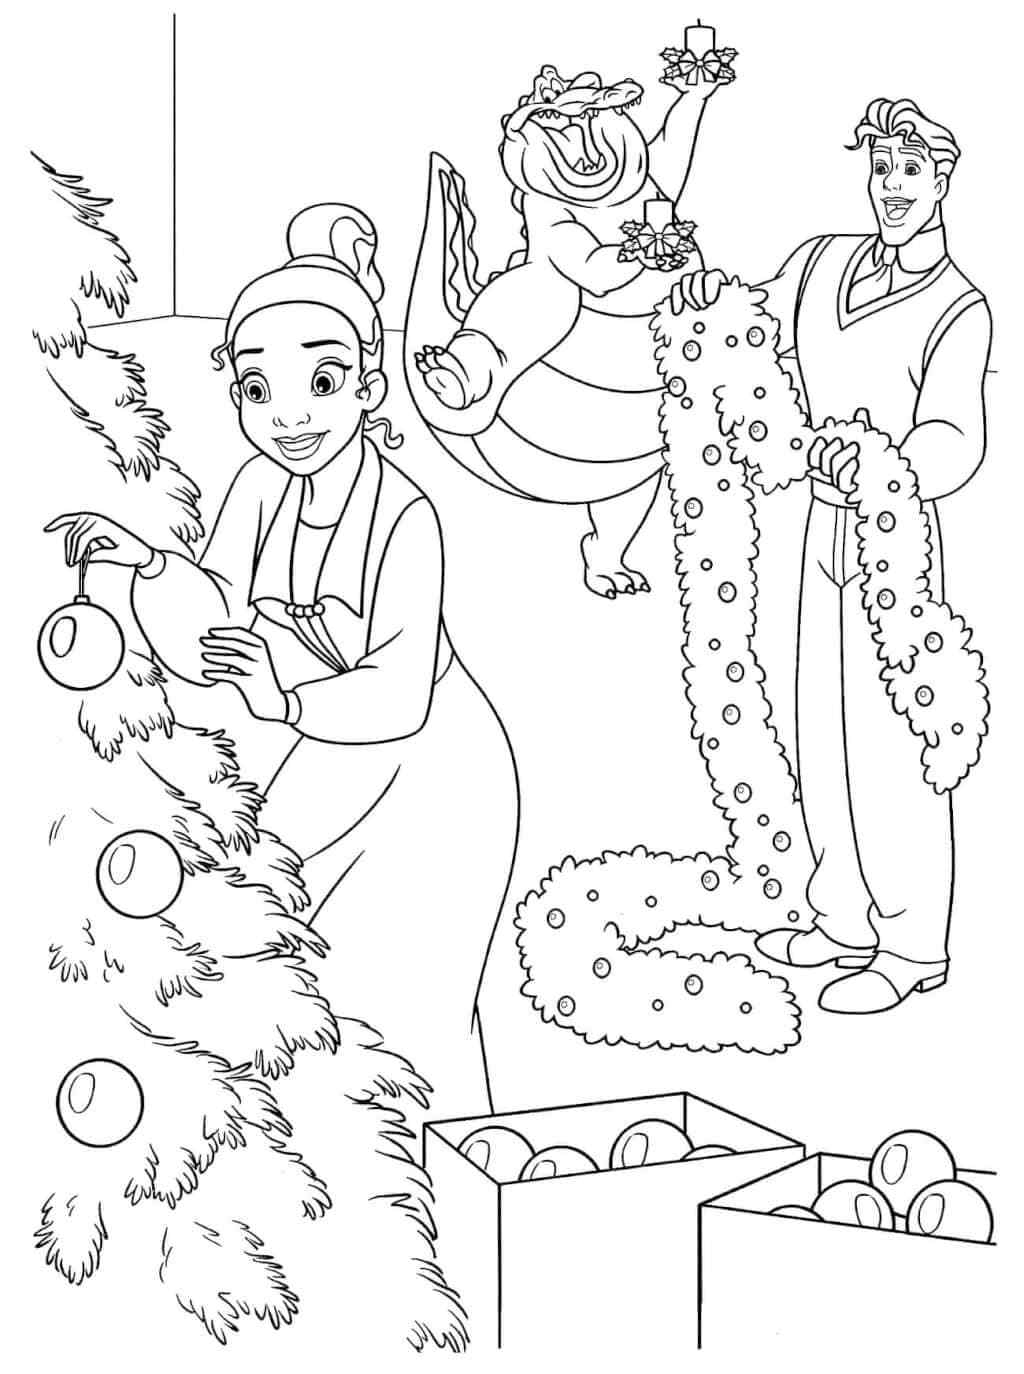 Decorating The Christmas tree Coloring Page